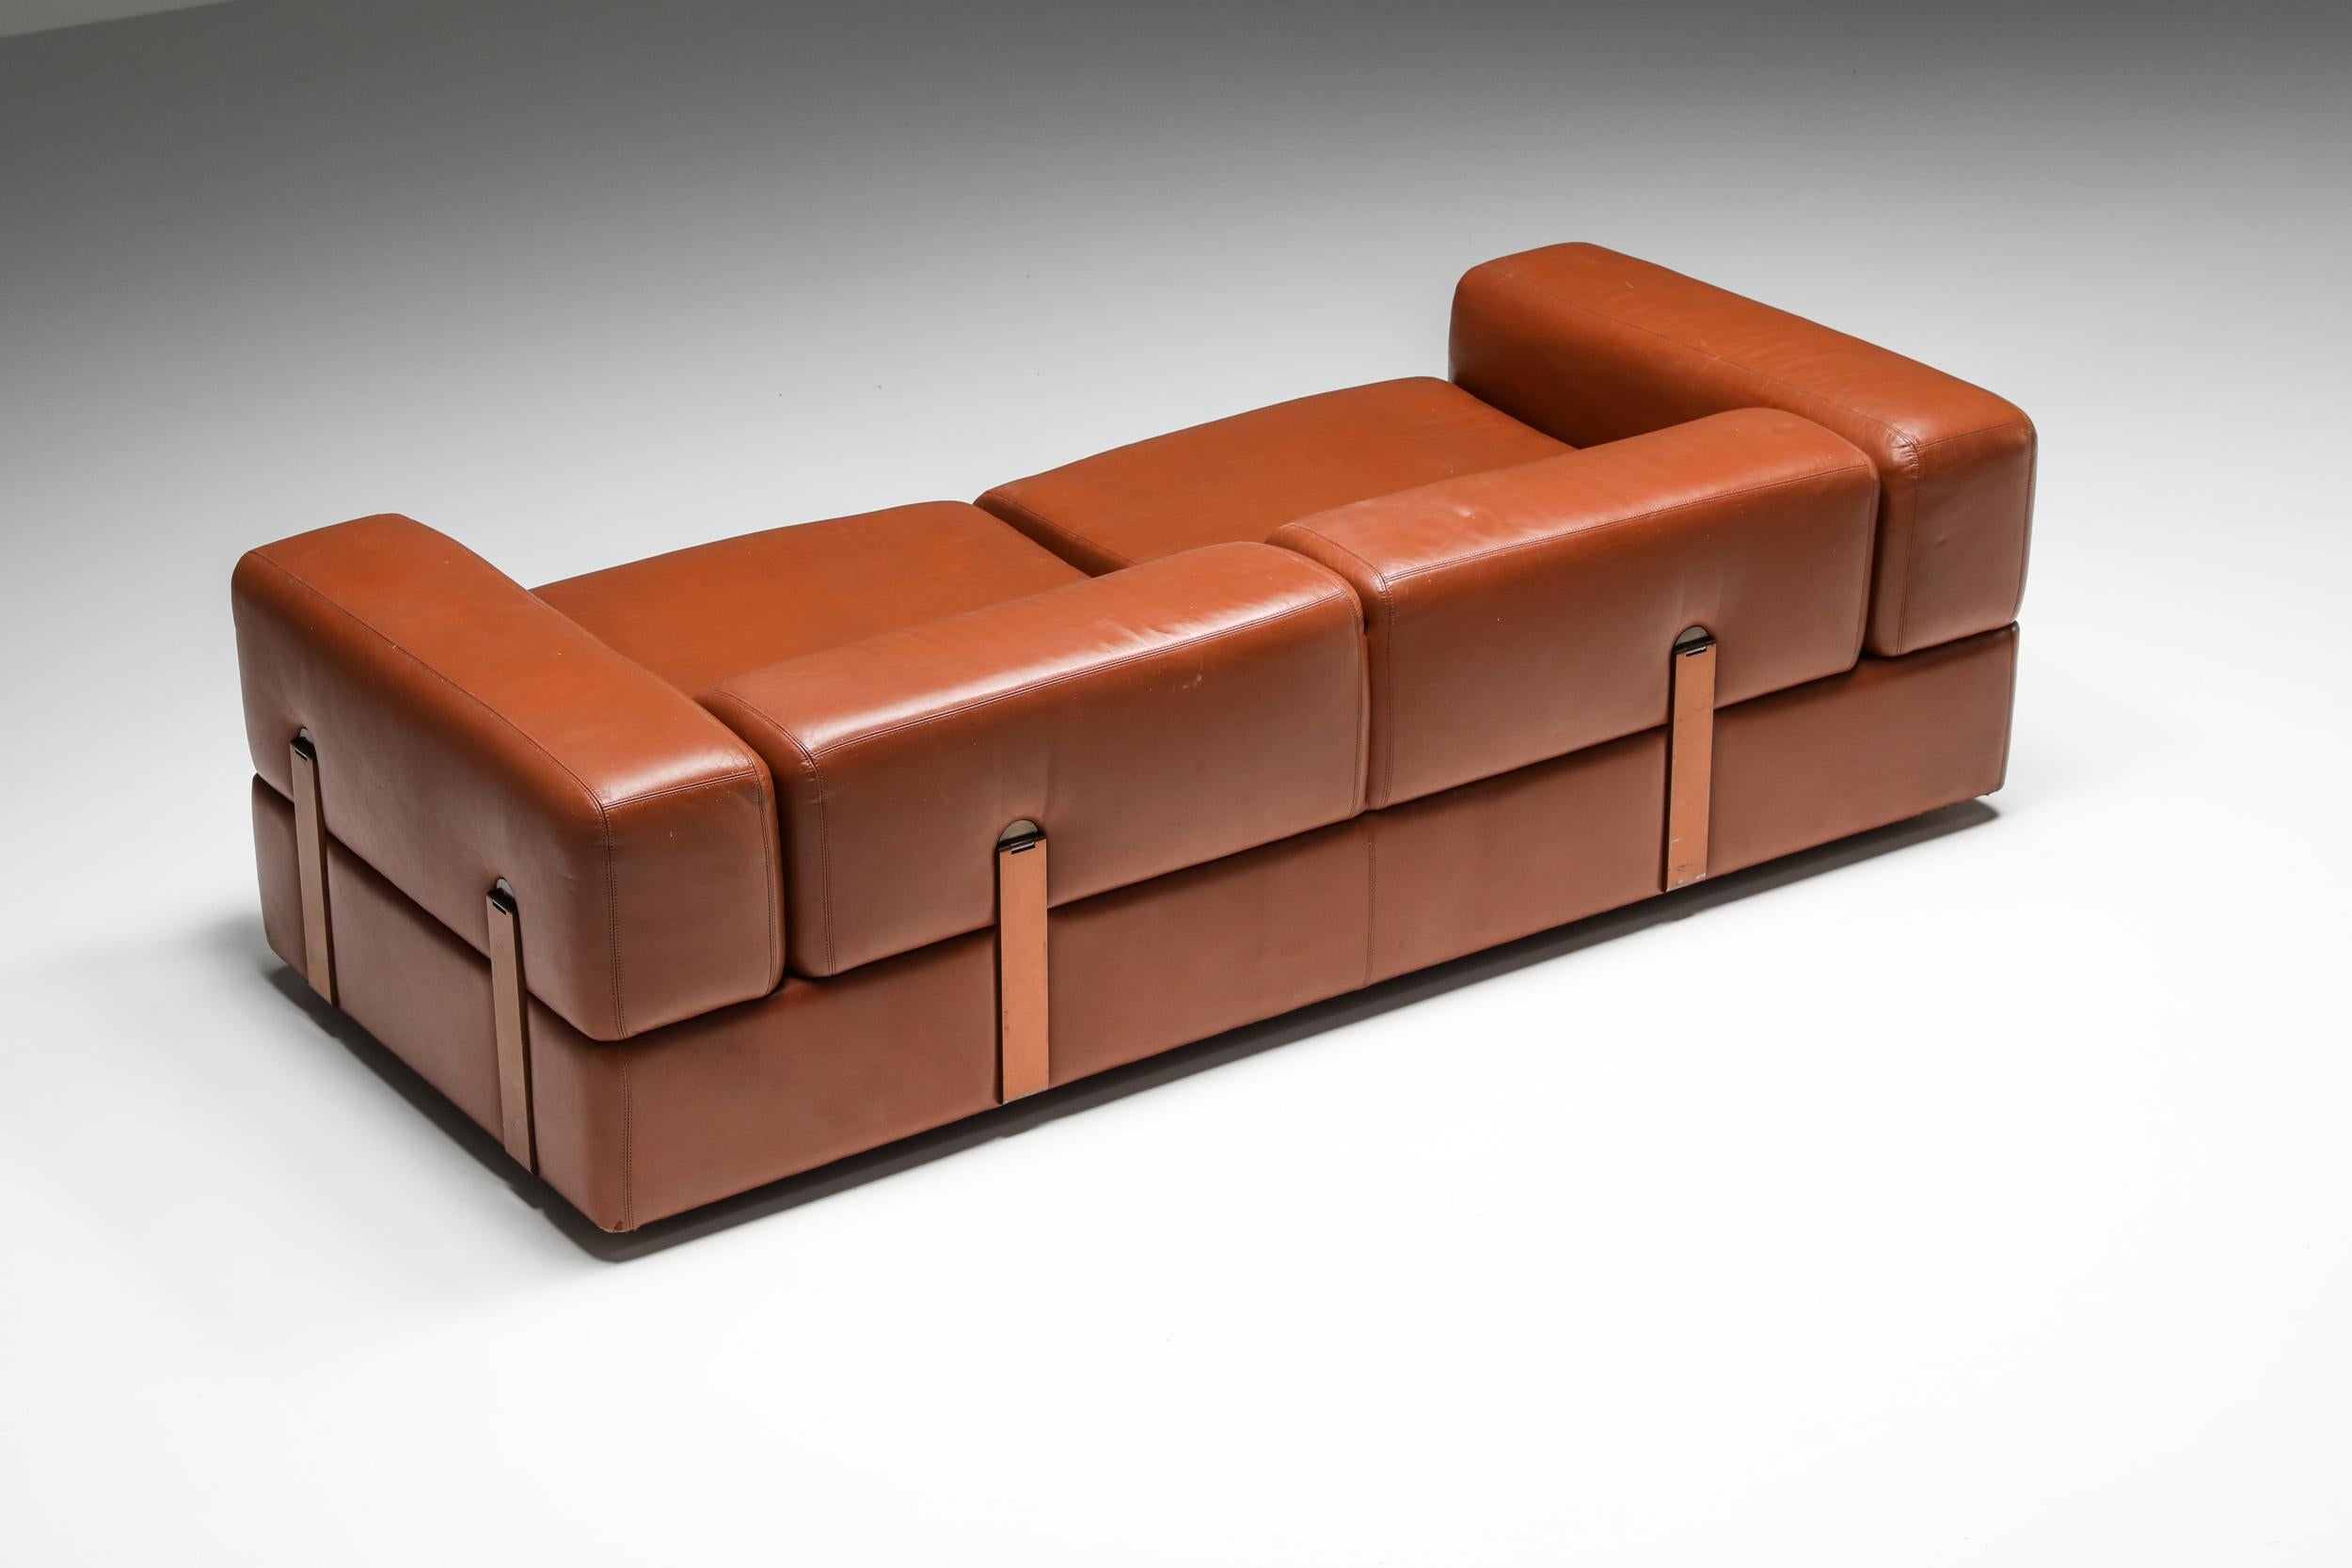 20th Century Postmodern Two-Seater Sofa by Tito Agnoli for Cinova in Cognac Leather, 1960's